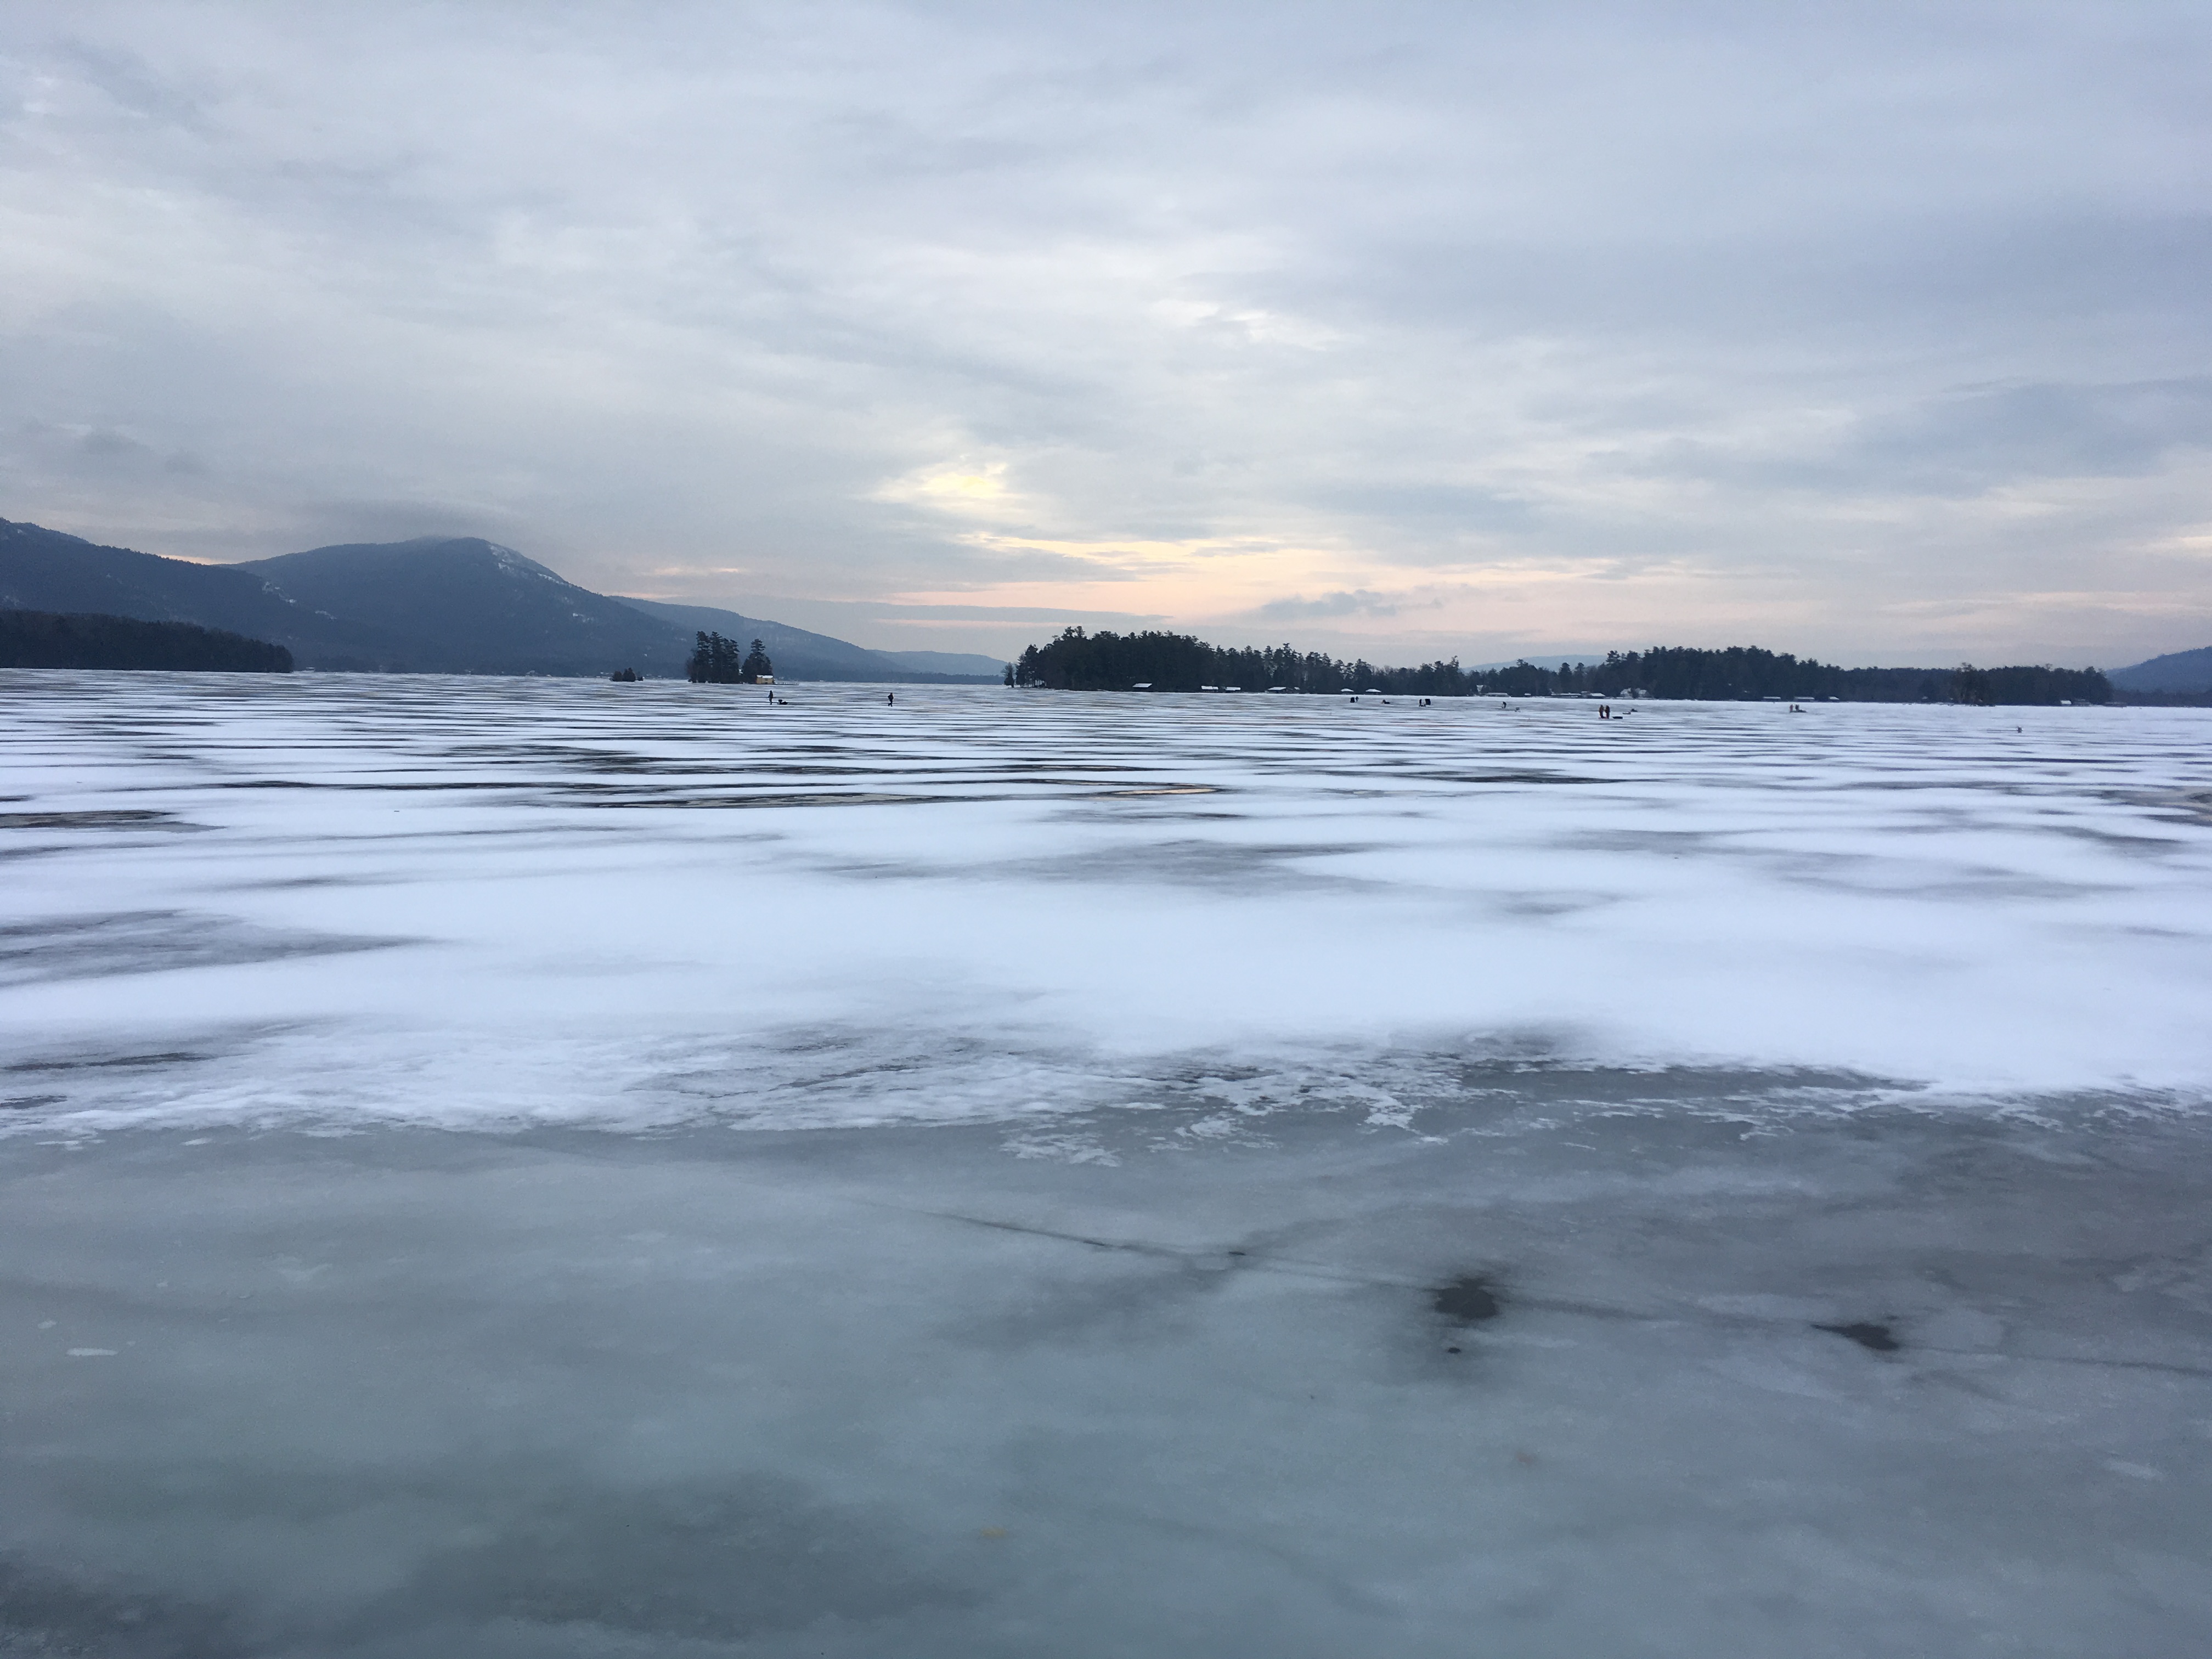 Morning on frozen Lake George with people ice fishing.